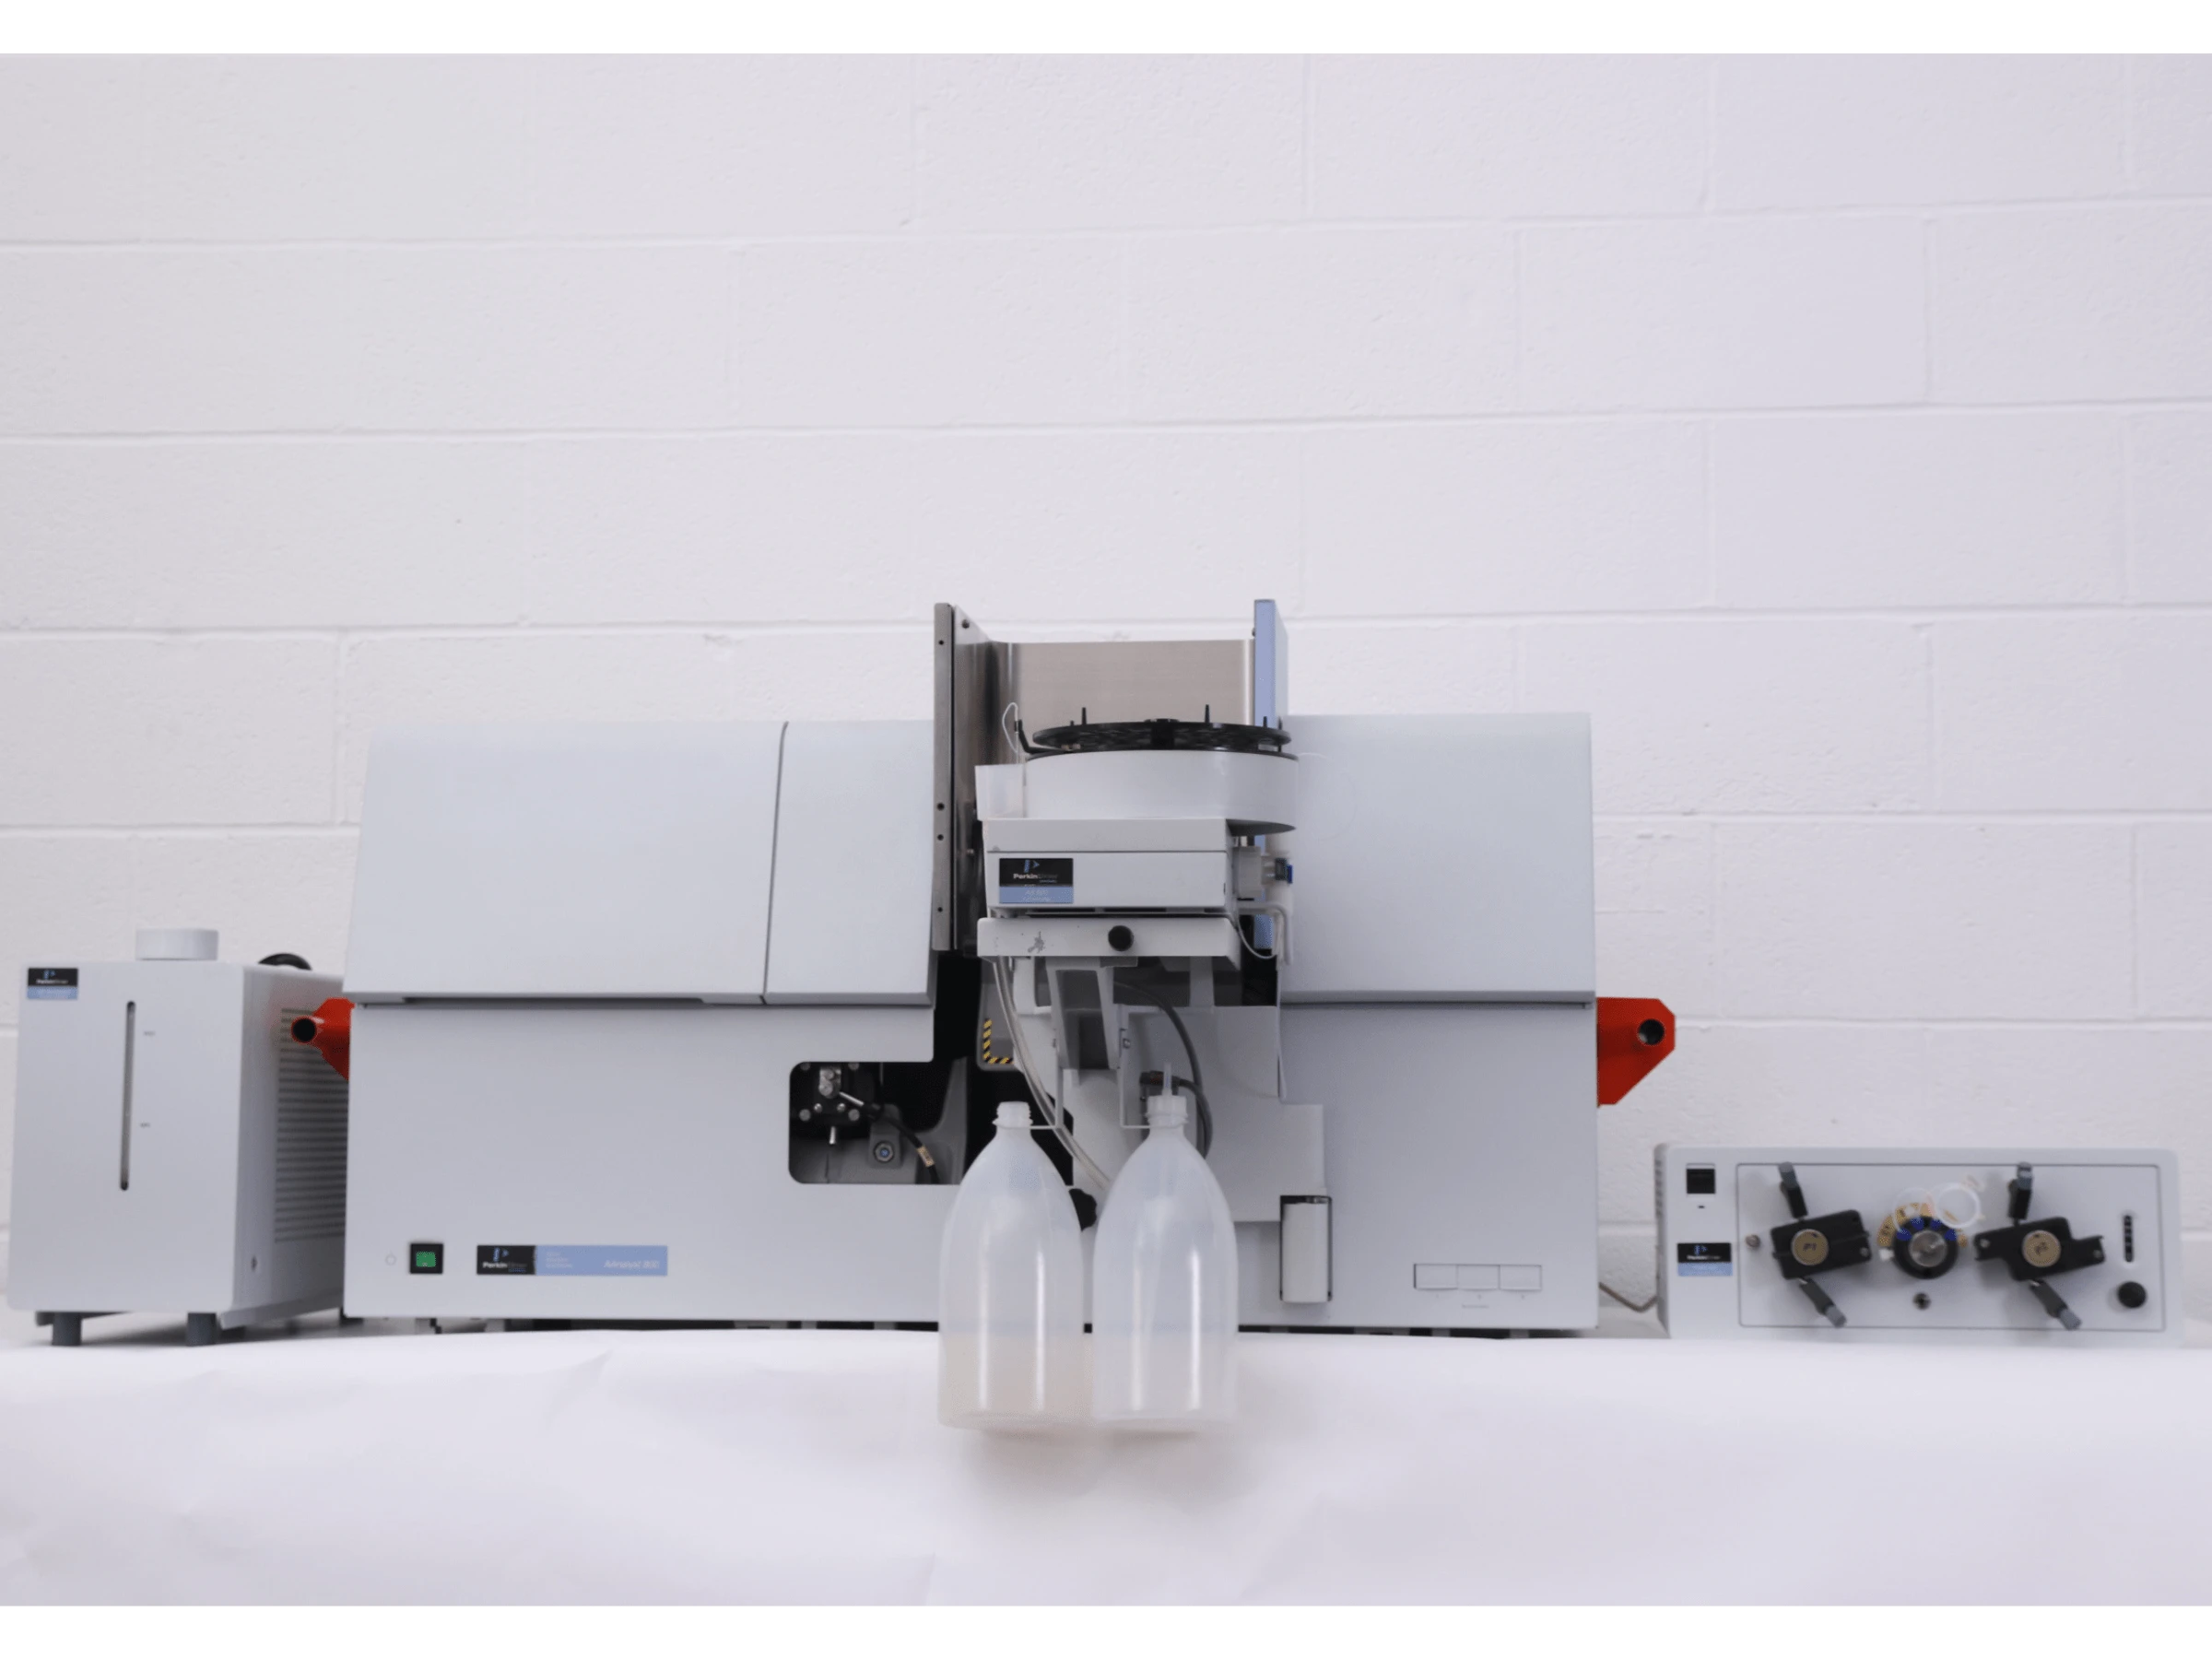 Perkin Elmer AAnalyst 800 Spectrometer with Autosampler and Flow injection